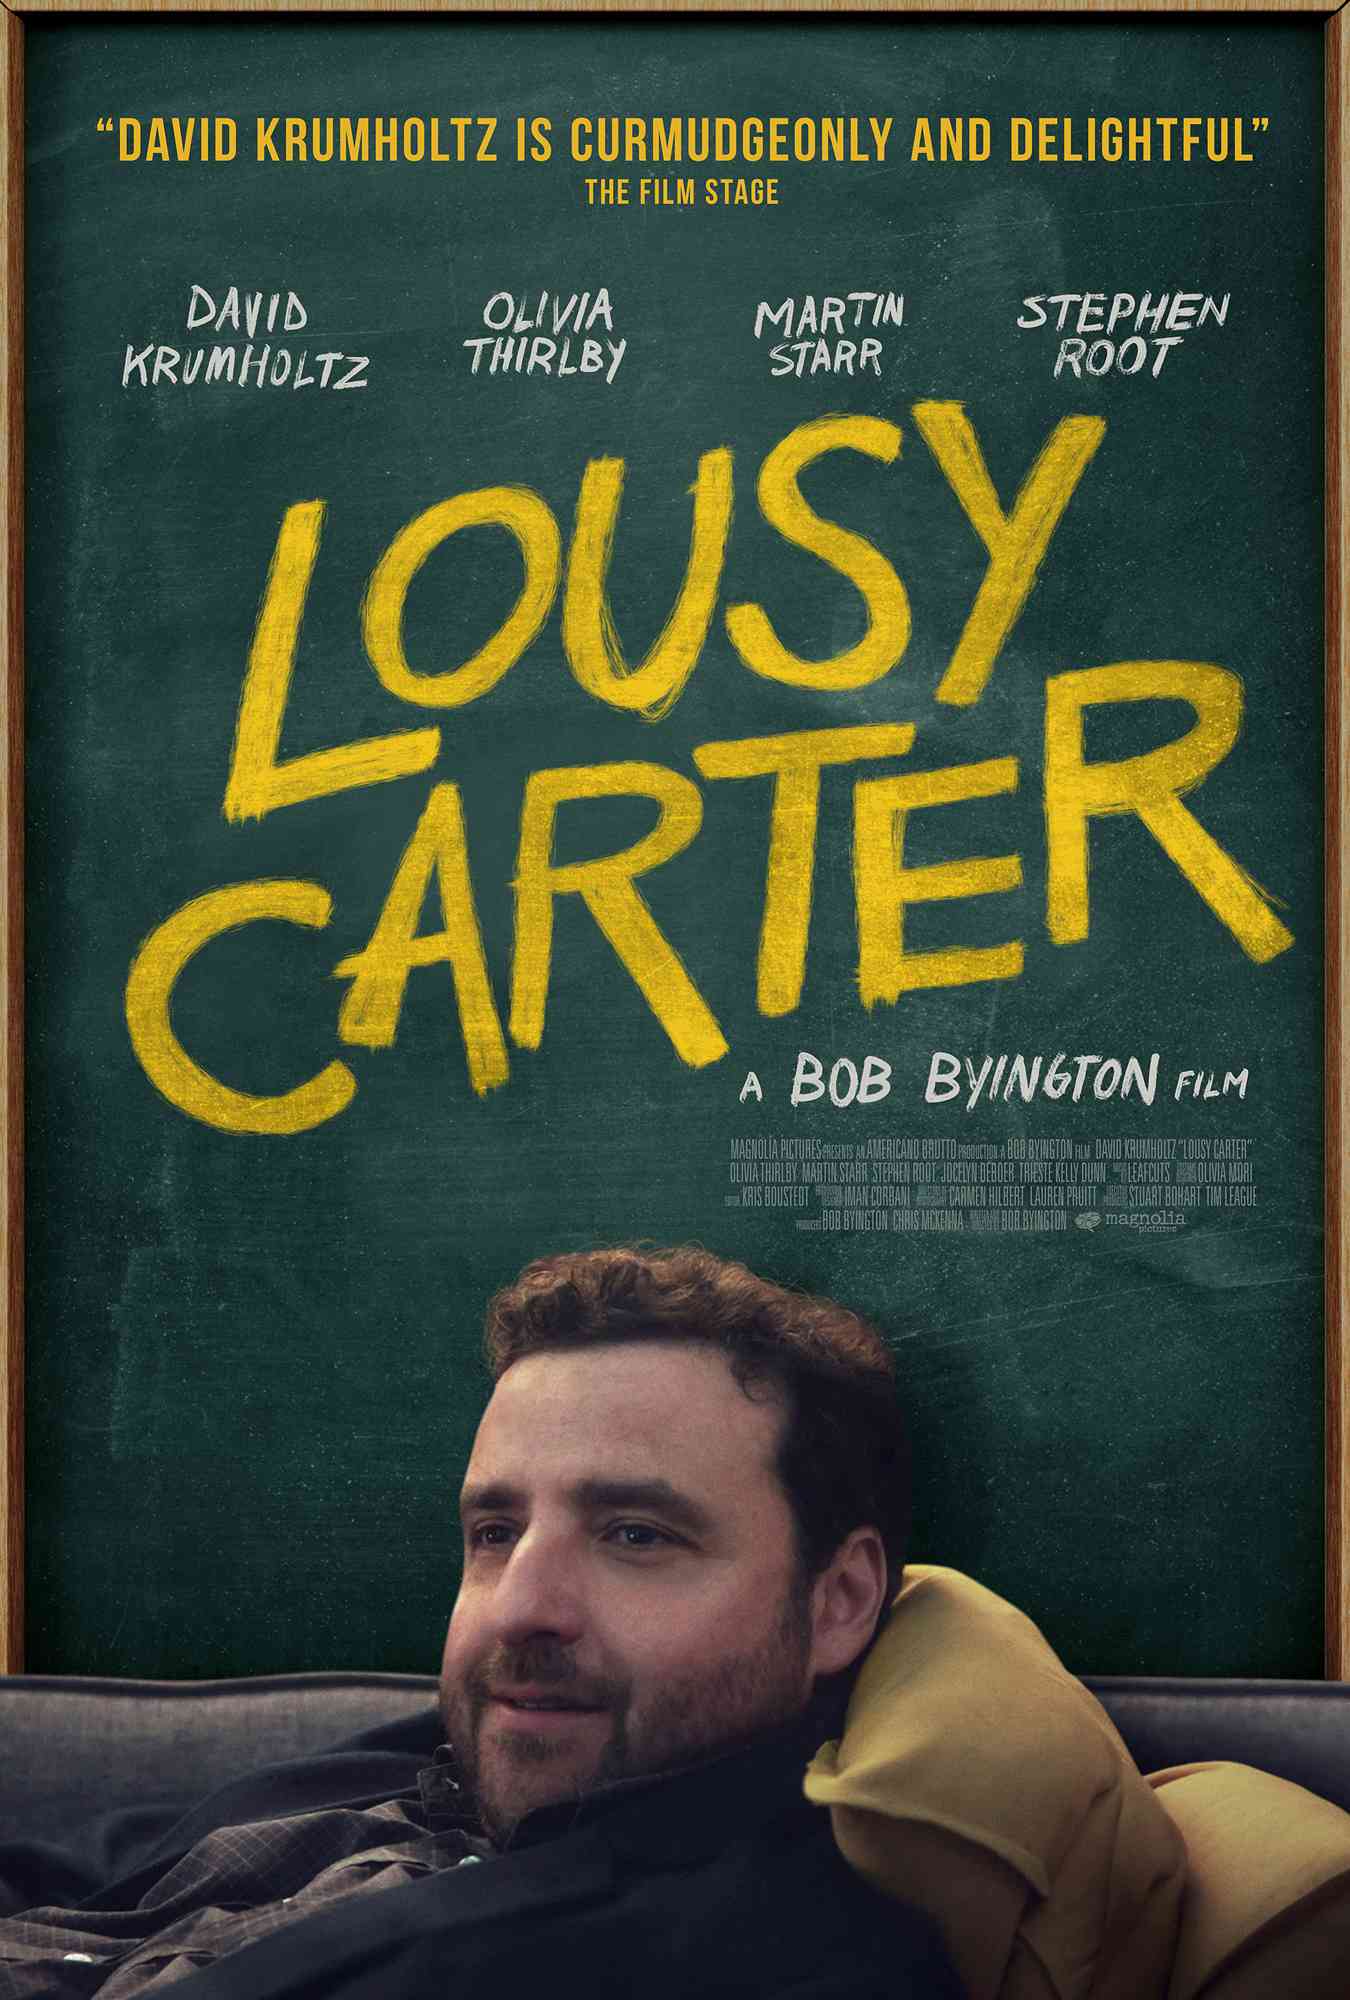 Theatrical one-sheet for LOUSY CARTER, a Magnolia Pictures release.